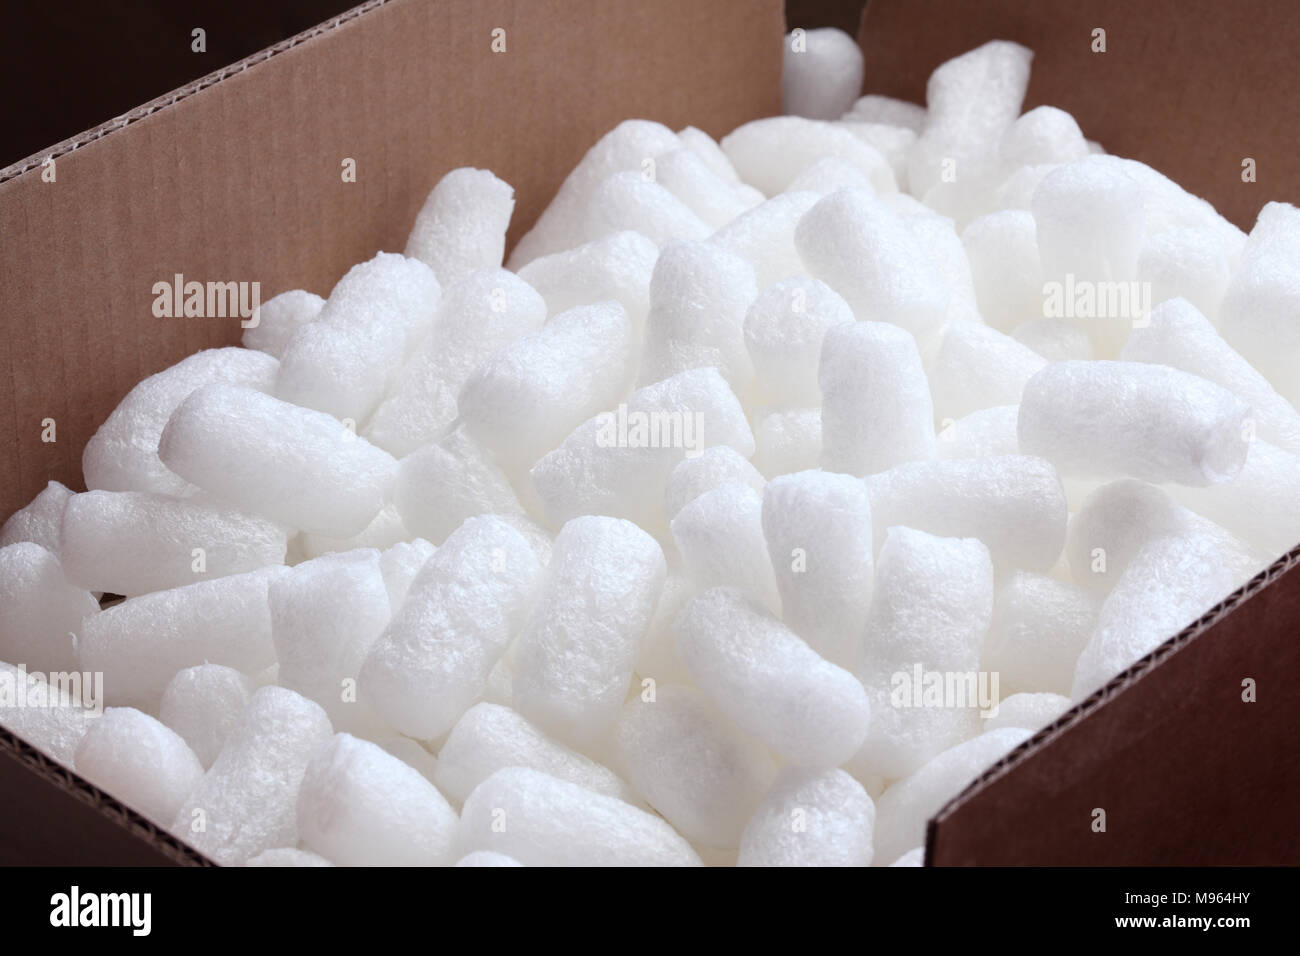 Polystyrene Foam Beads Polystyrene Foam Texture, Close Up Shot Stock Photo,  Picture and Royalty Free Image. Image 13871023.